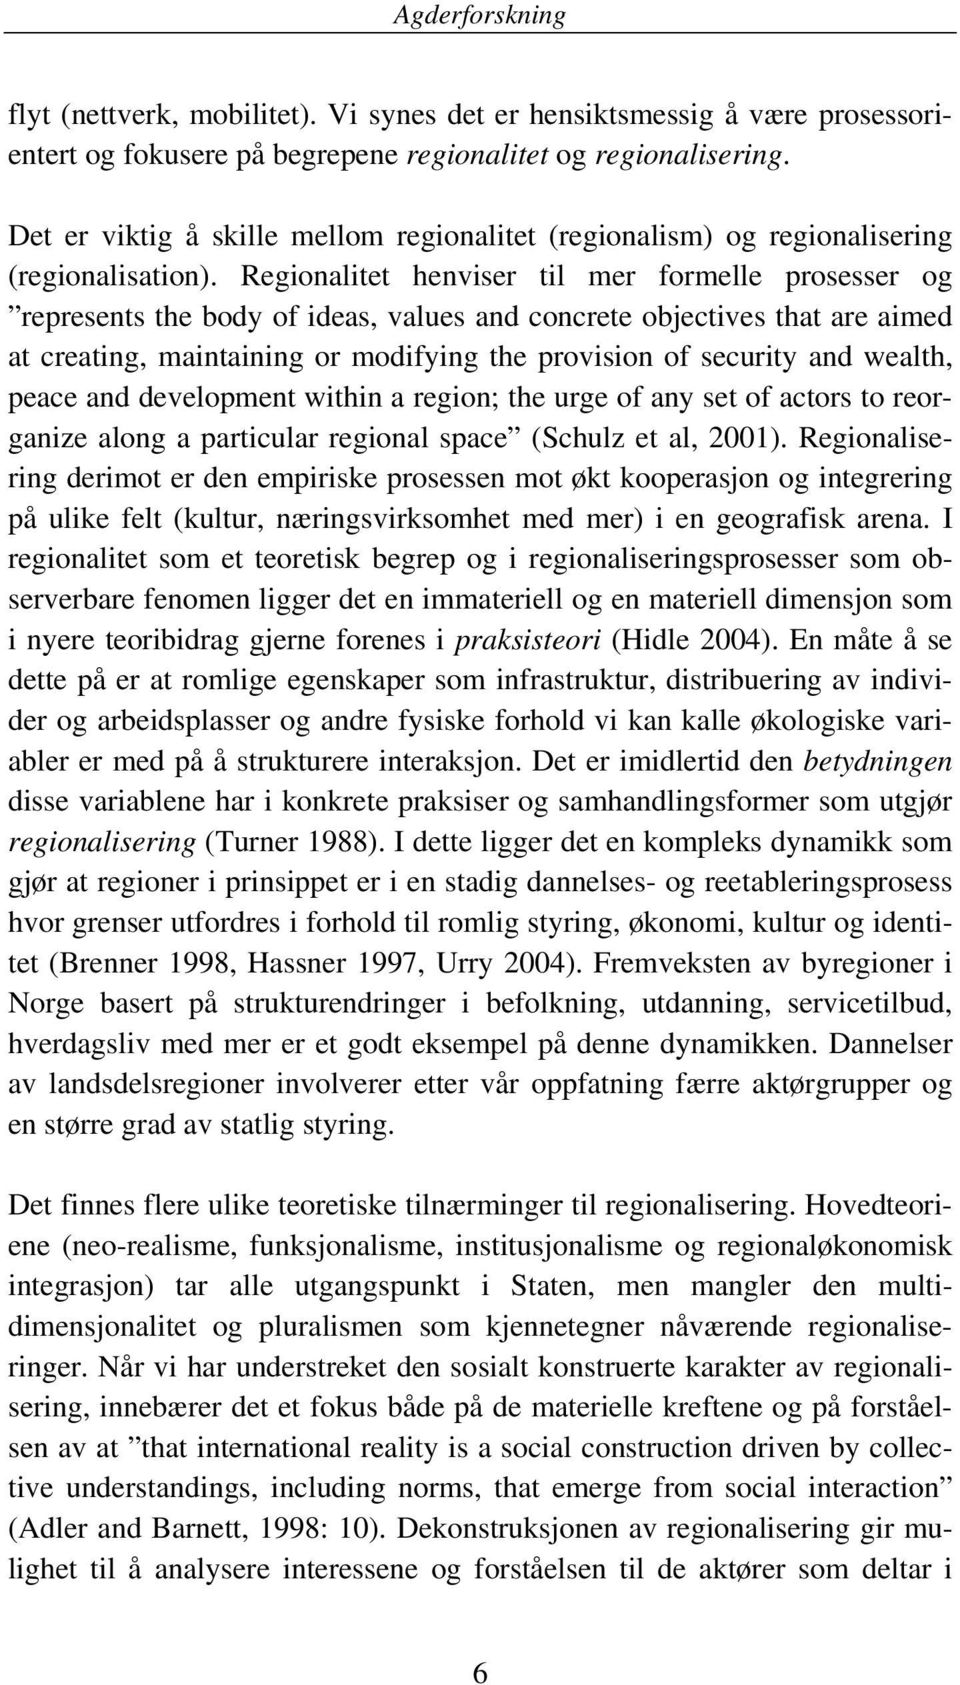 Regionalitet henviser til mer formelle prosesser og represents the body of ideas, values and concrete objectives that are aimed at creating, maintaining or modifying the provision of security and